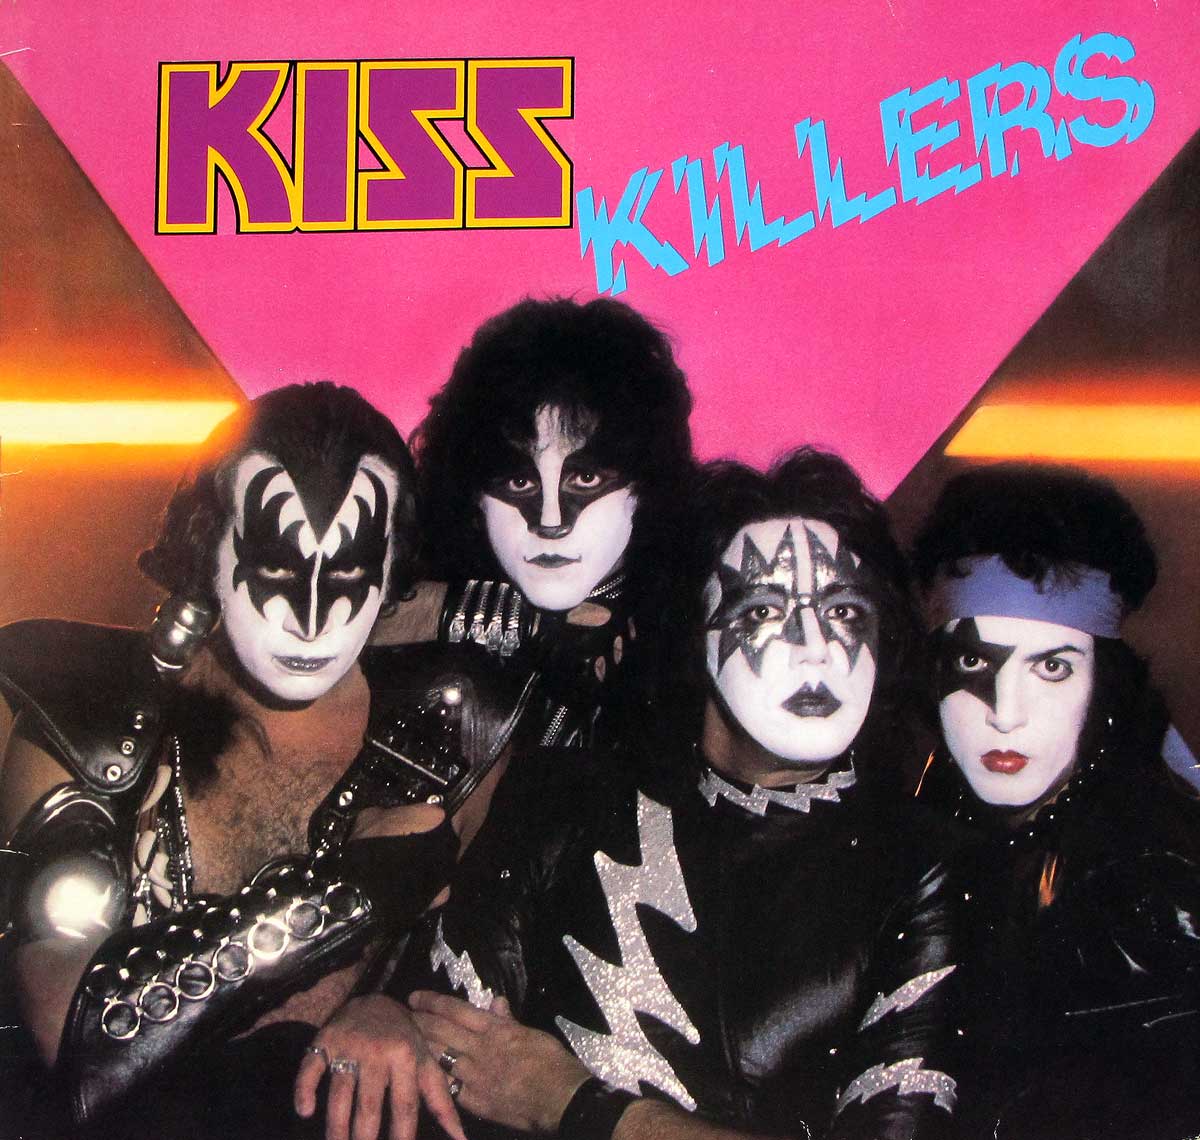 large photo of the album front cover of: Kiss Killers